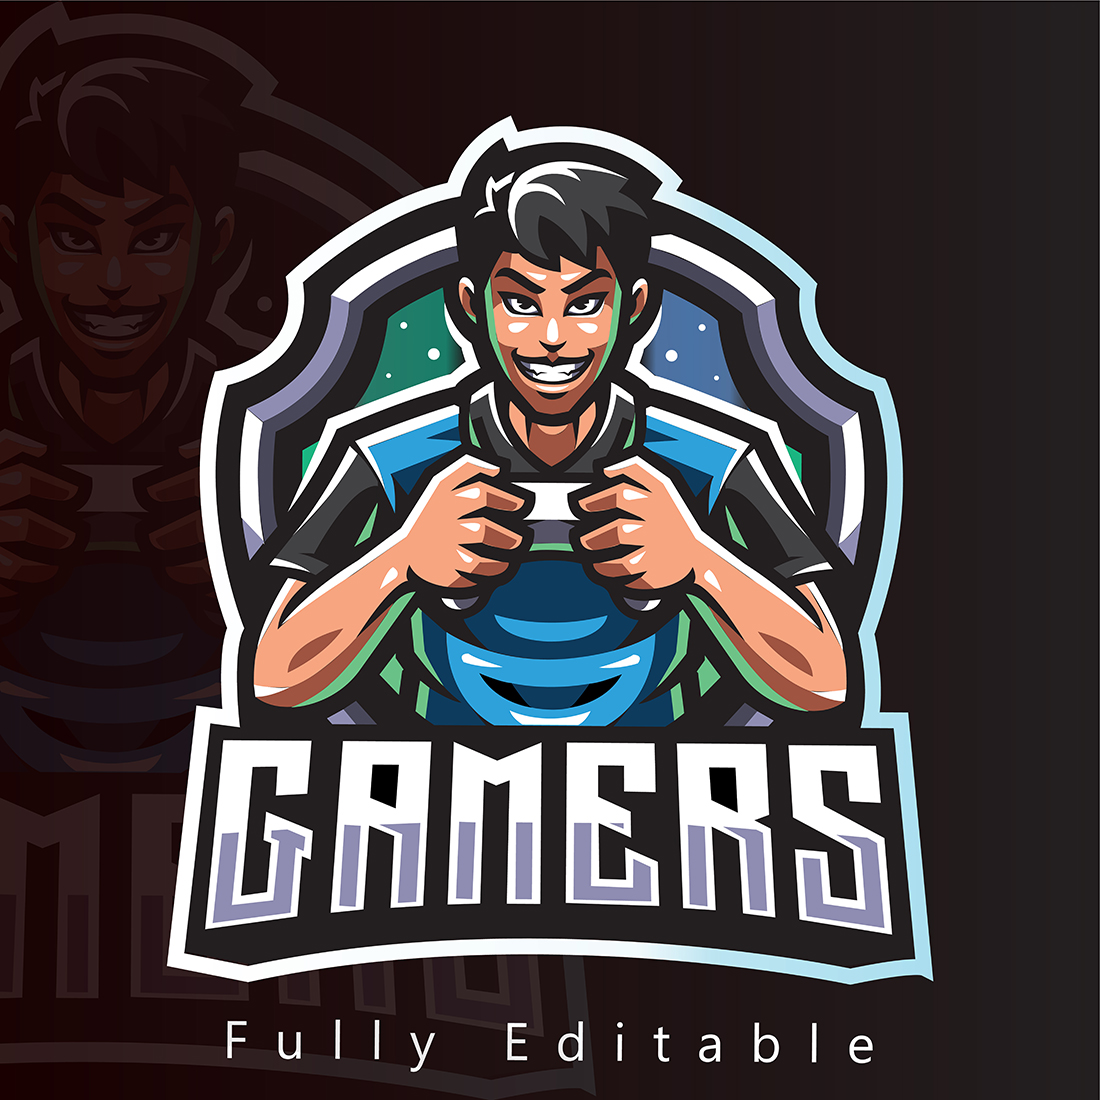 Gaming Logo with Illustration Design cover image.